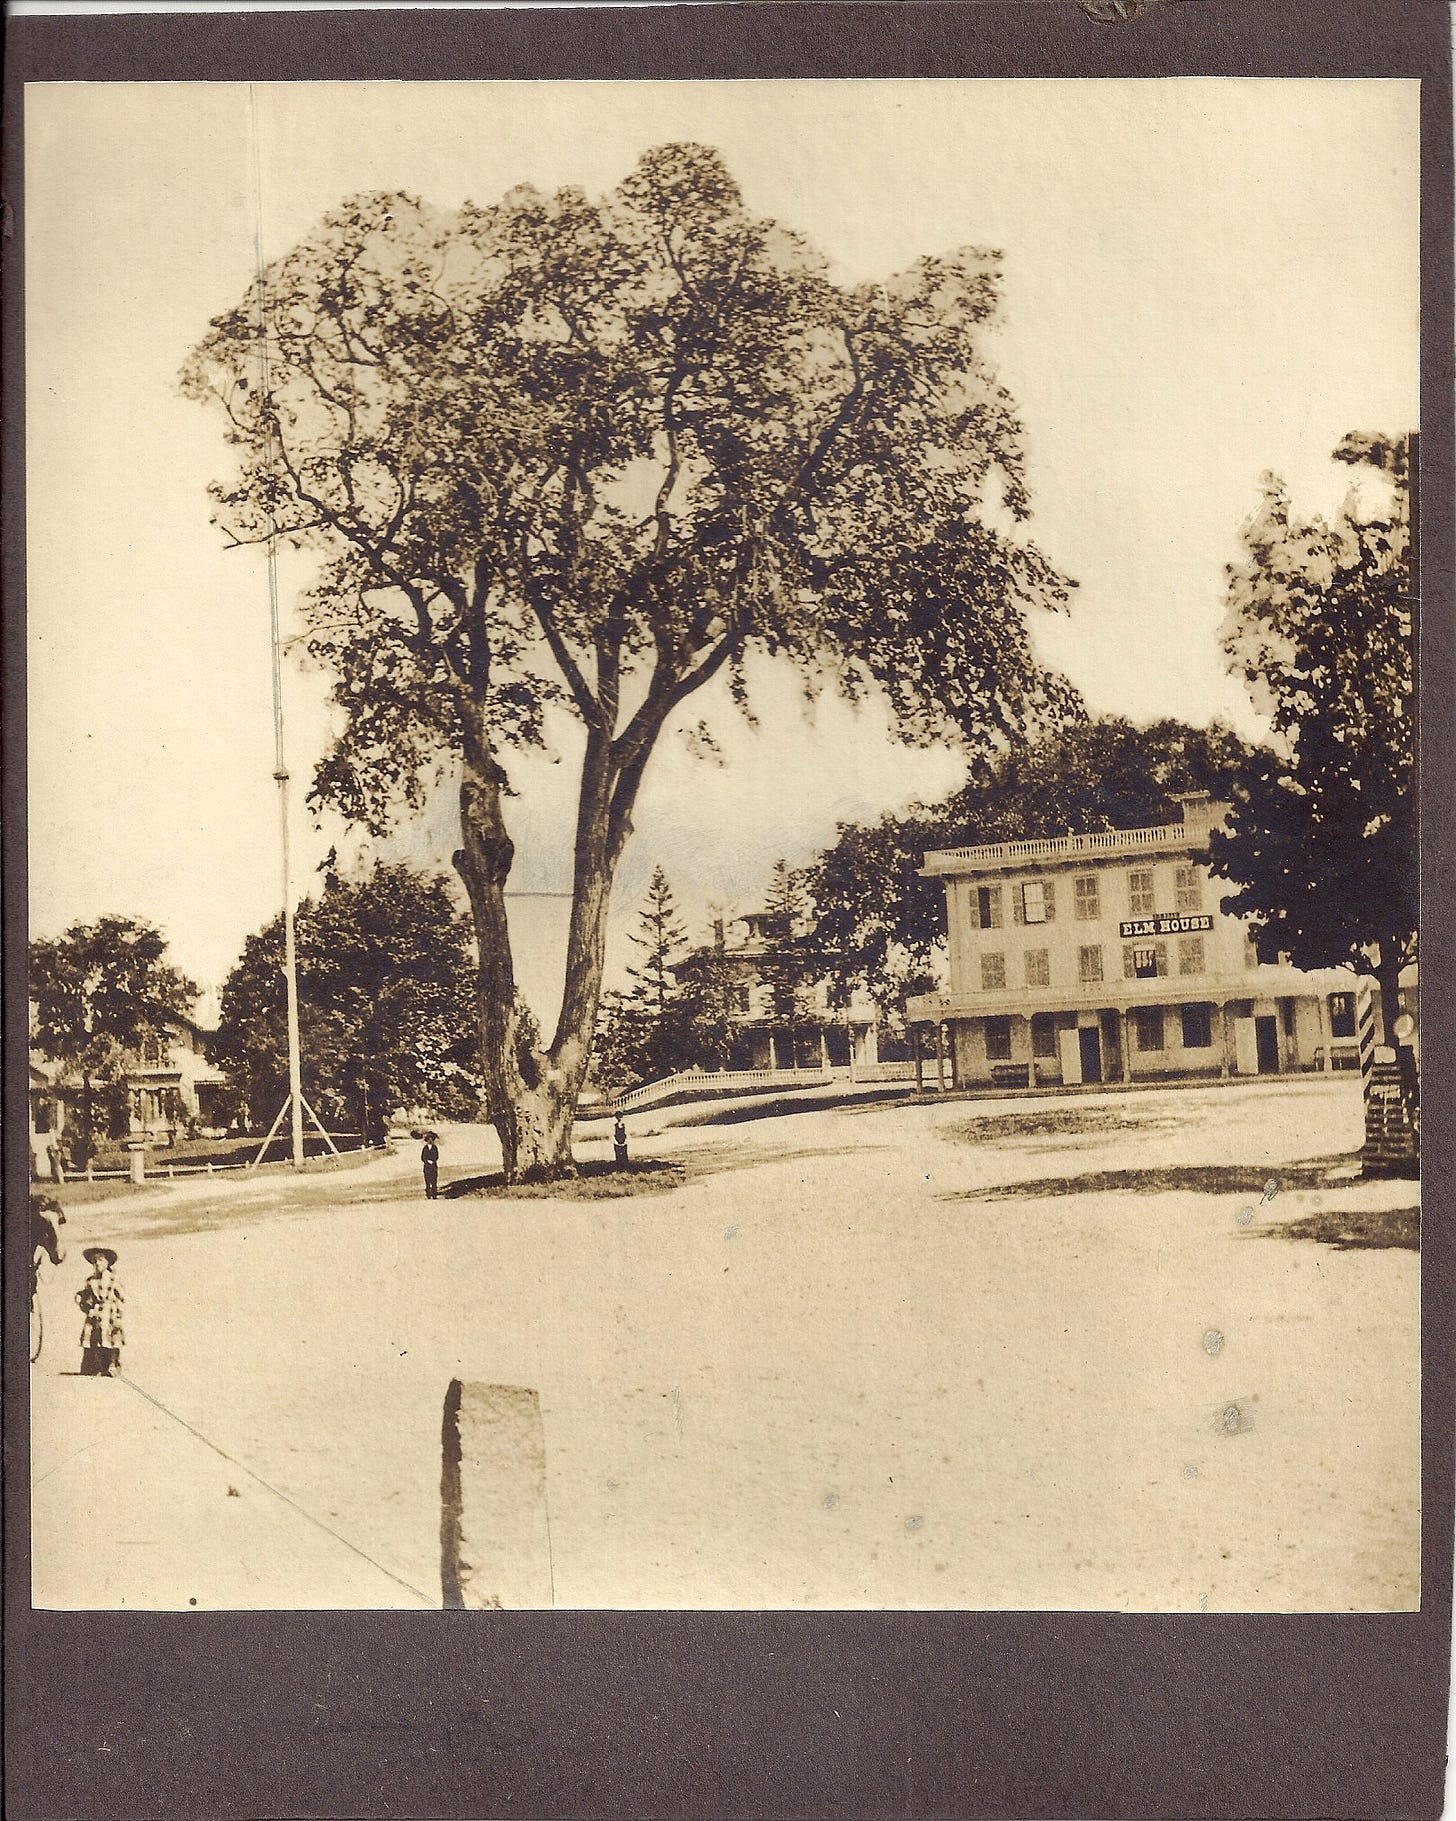 sepia toned photograph of double-trunked elm tree in the middle of an unpaved square. Elm House hotel in background. Child in broad-brimmed hat with horse at left.